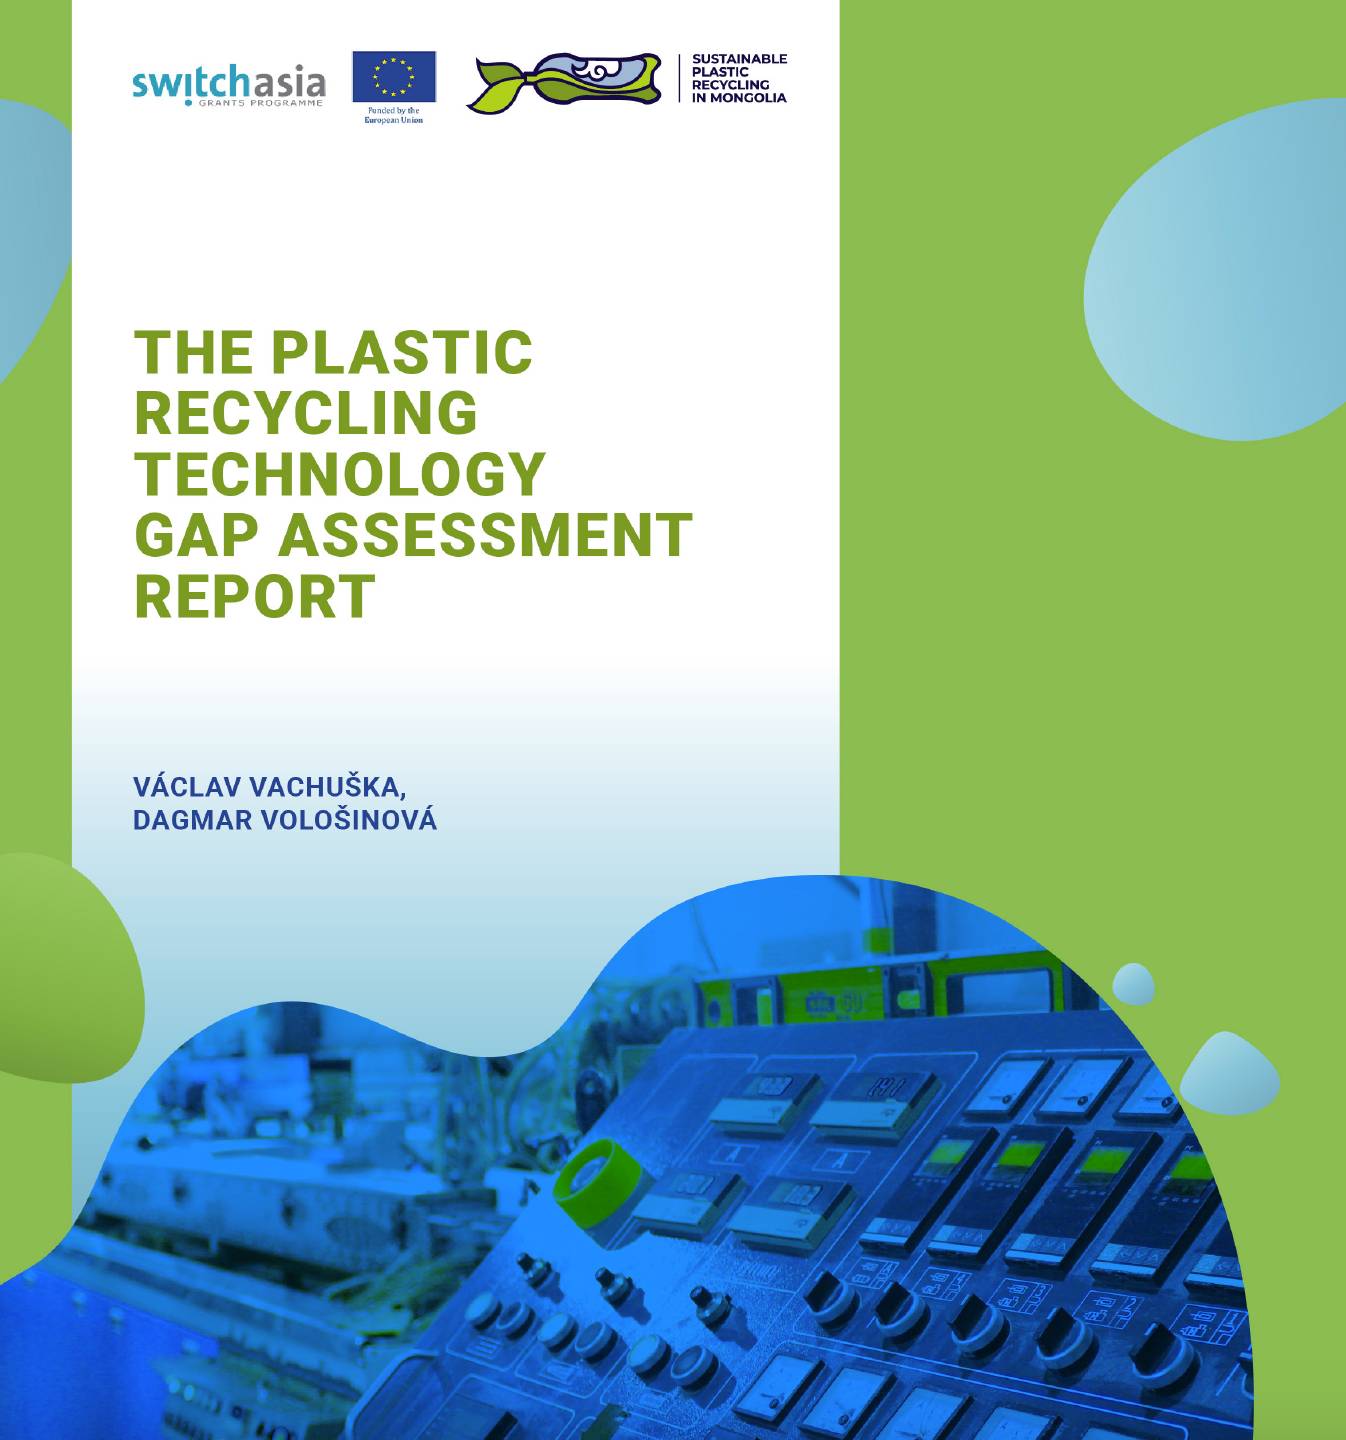 The Plastic recycling technology gap assessment